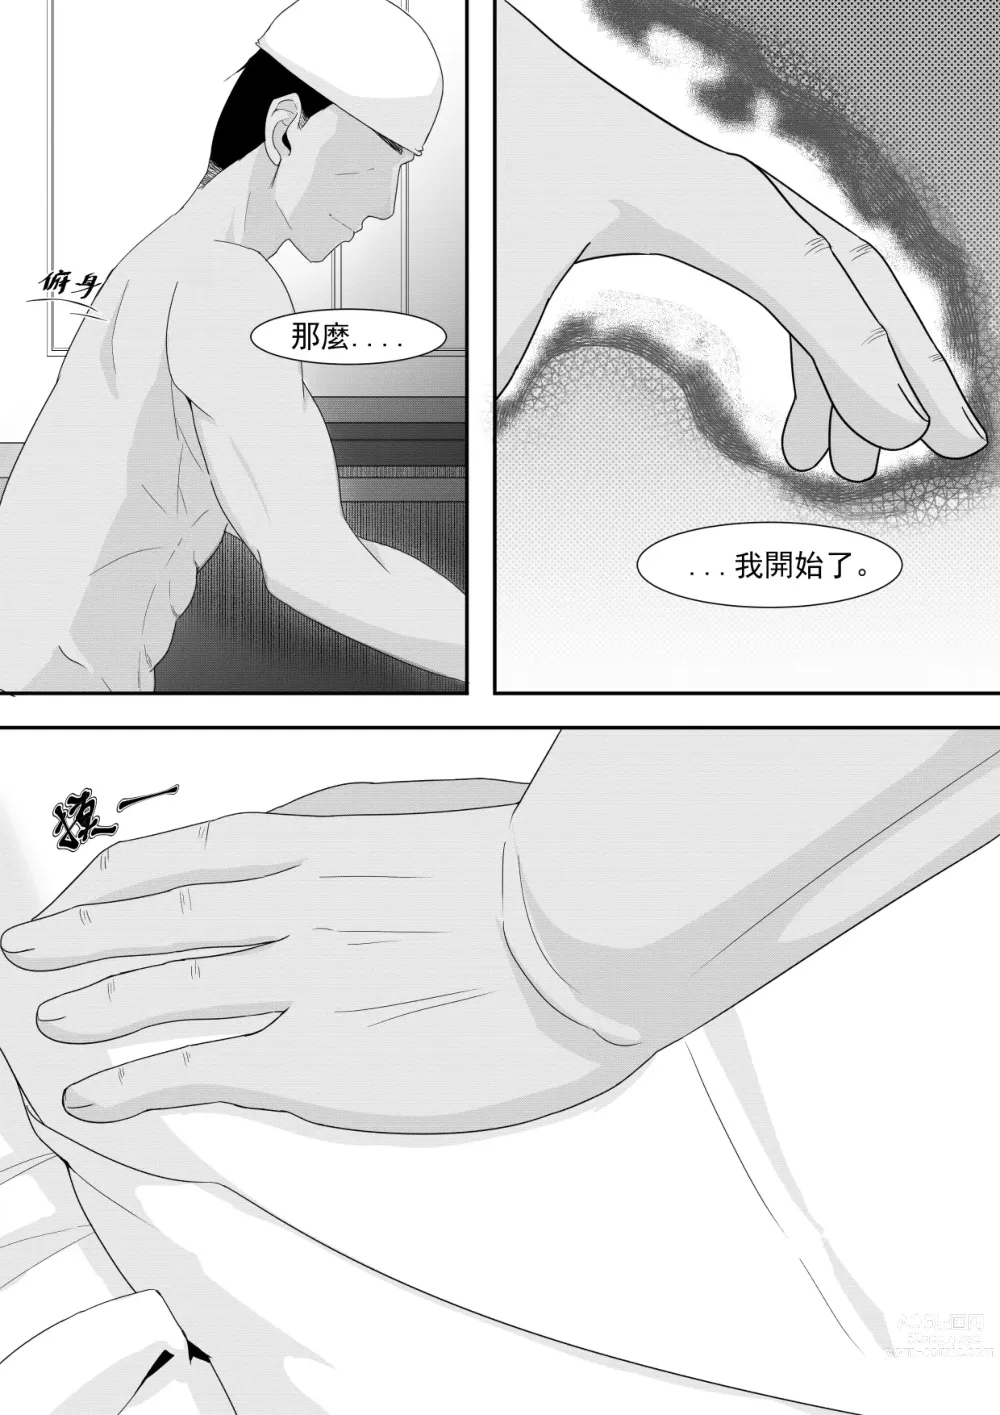 Page 7 of doujinshi Private Visit Time Part 2